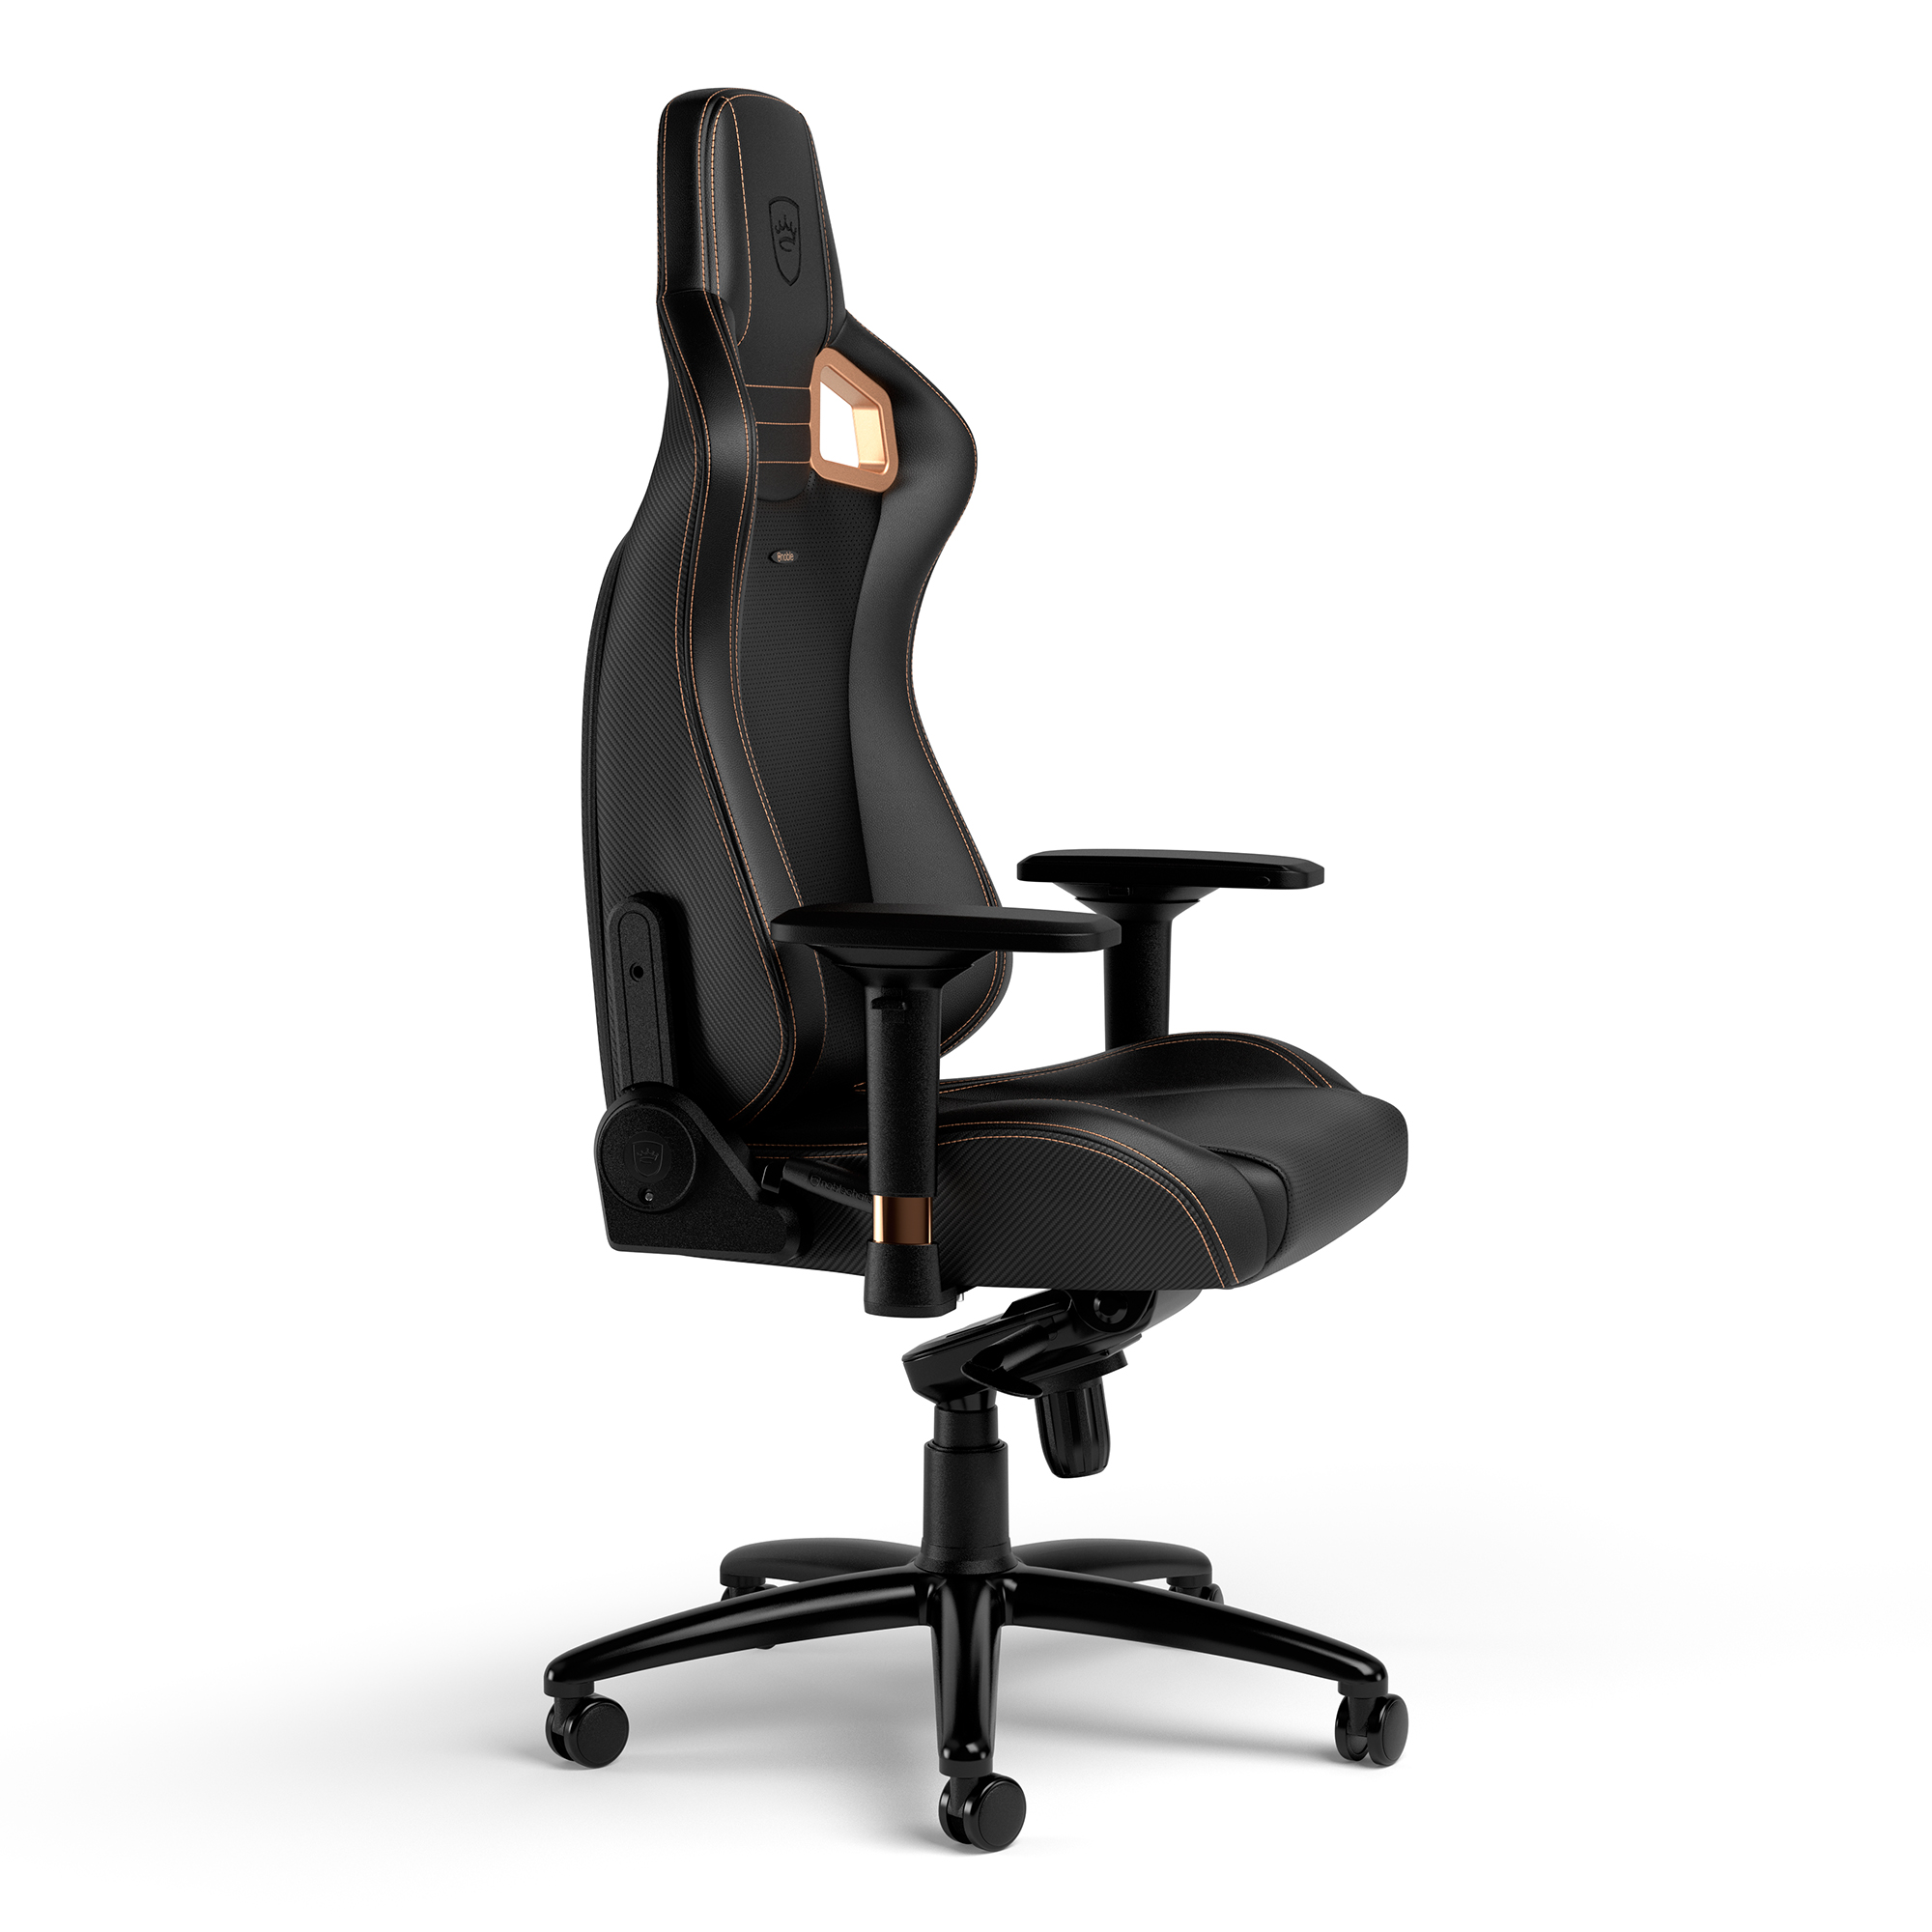 noblechairs - noblechairs EPIC Gaming Chair Limited Edition Copper - BlackCopper